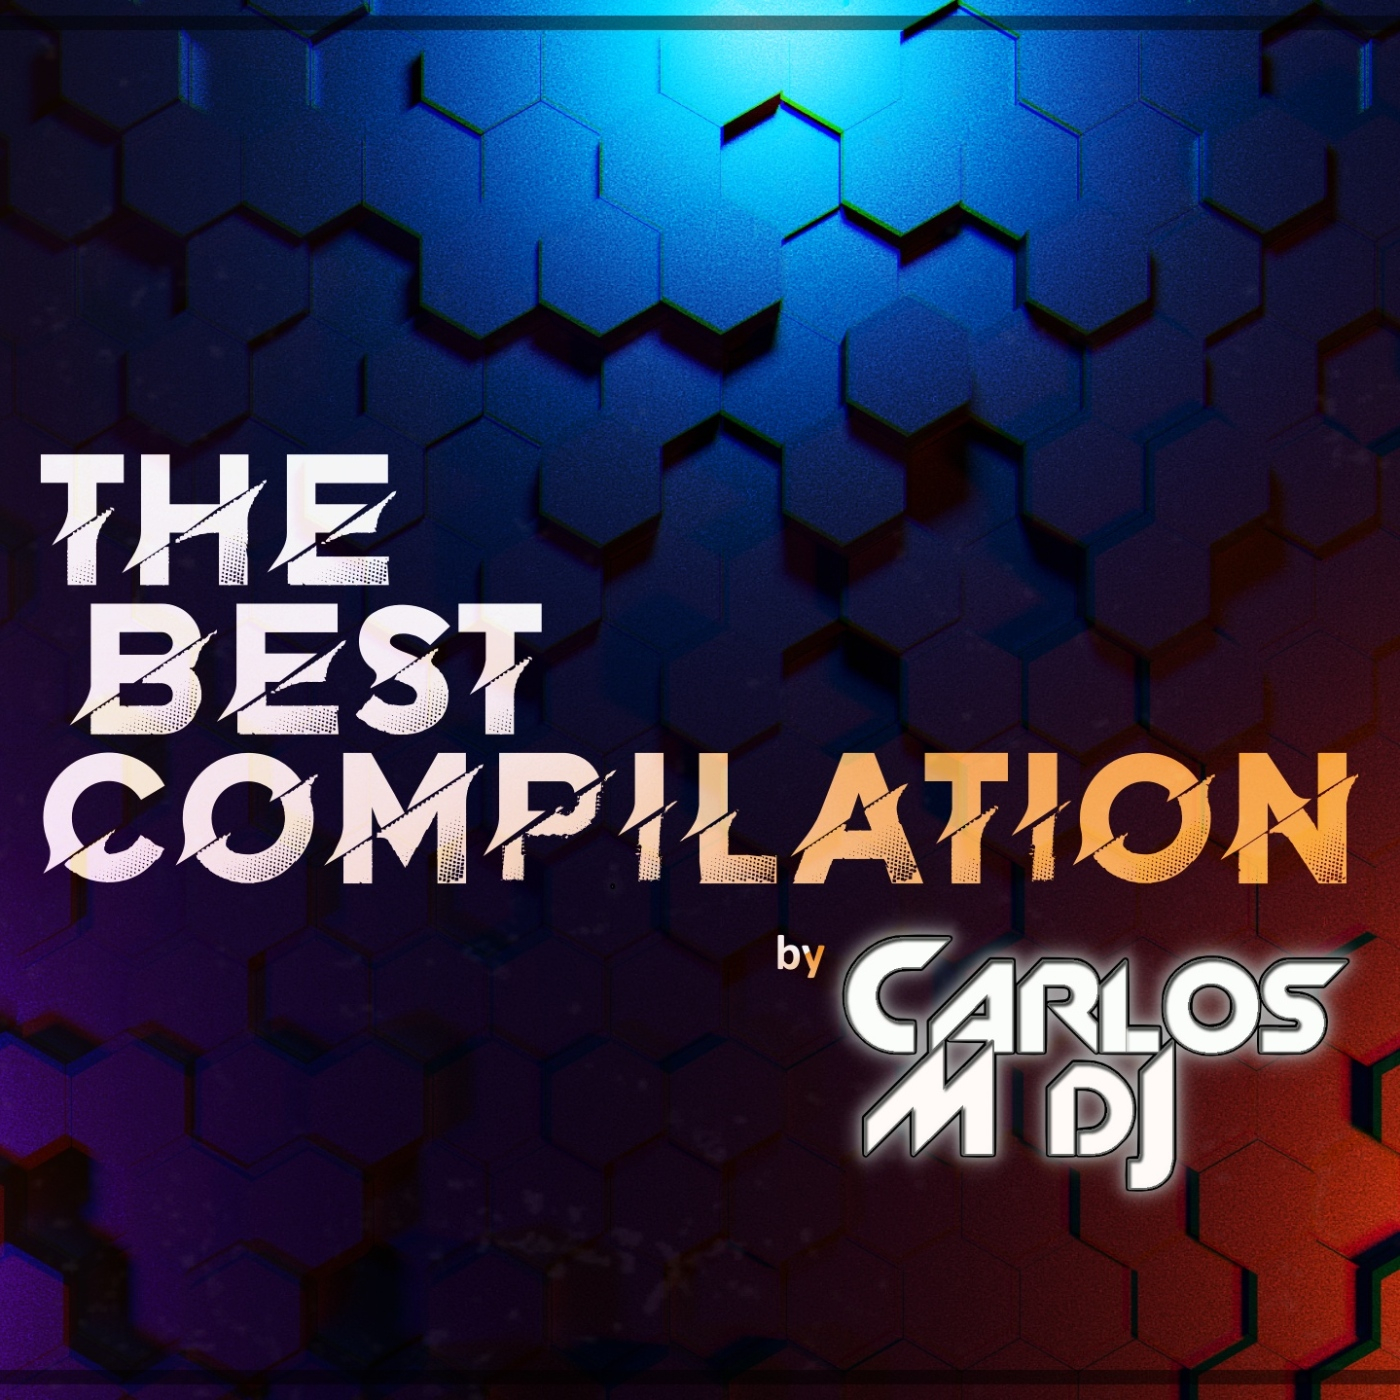 The Best Compilation Radio Sets by Carlos M Dj